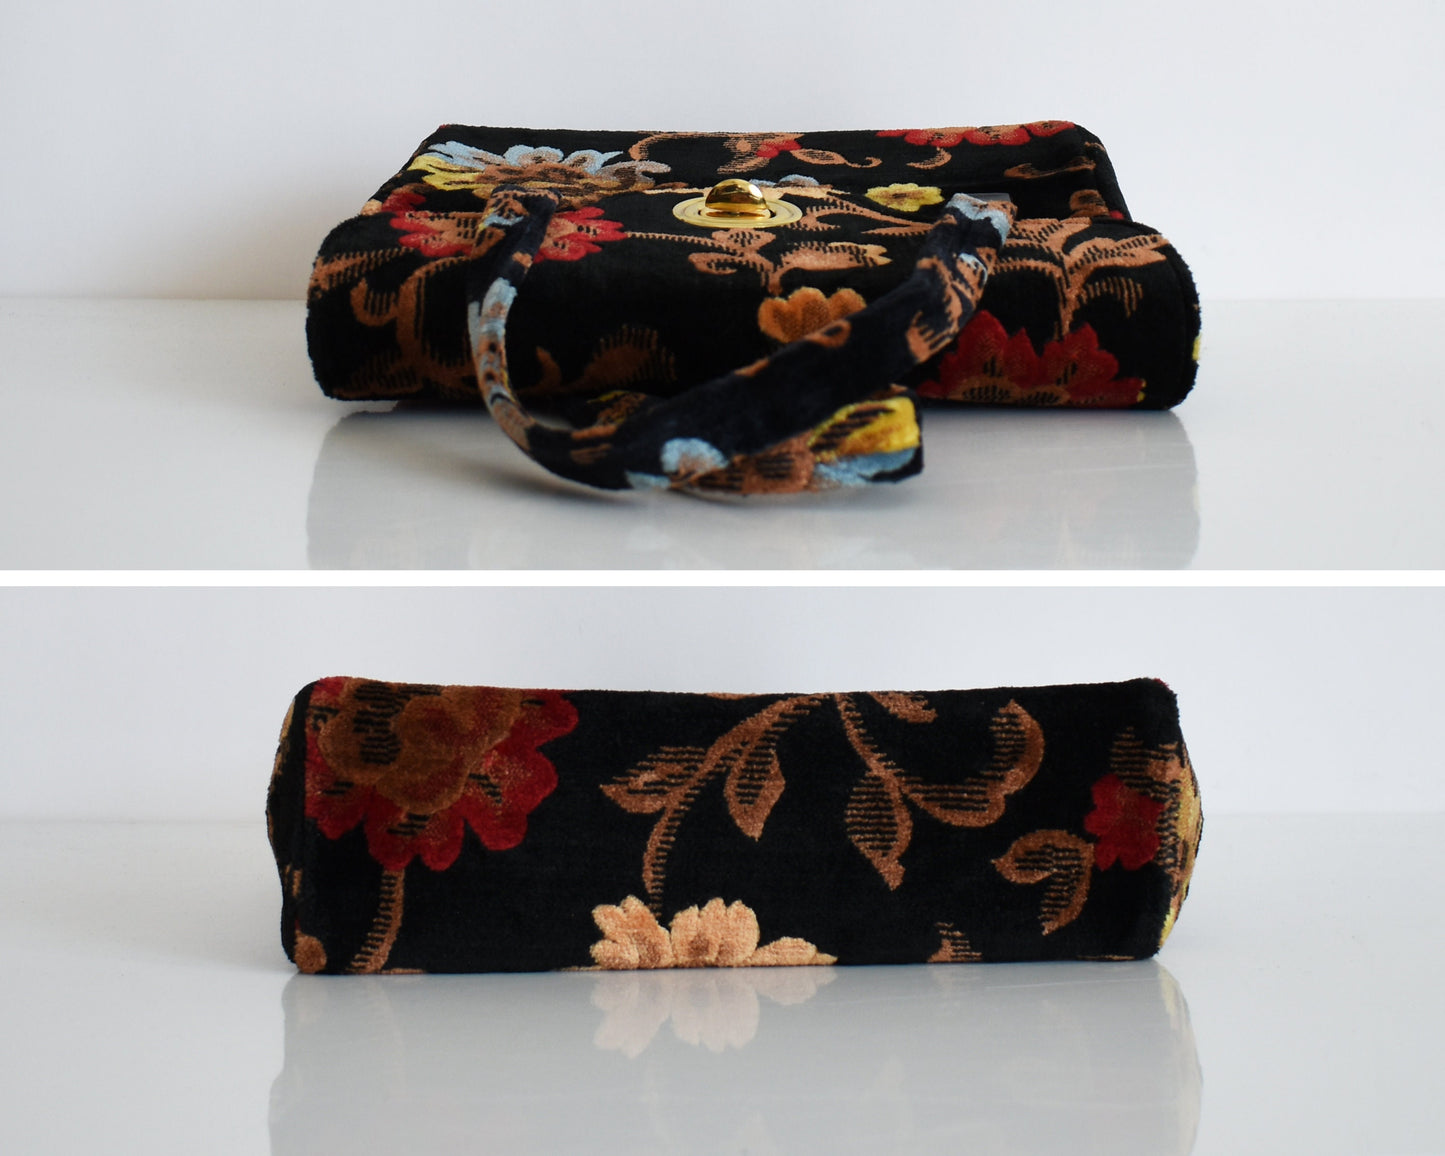 Top and bottom view of a vintage black floral velvet chenille handbag on a white table. The flowers are red, blue, yellow and have brown stems and leaves.